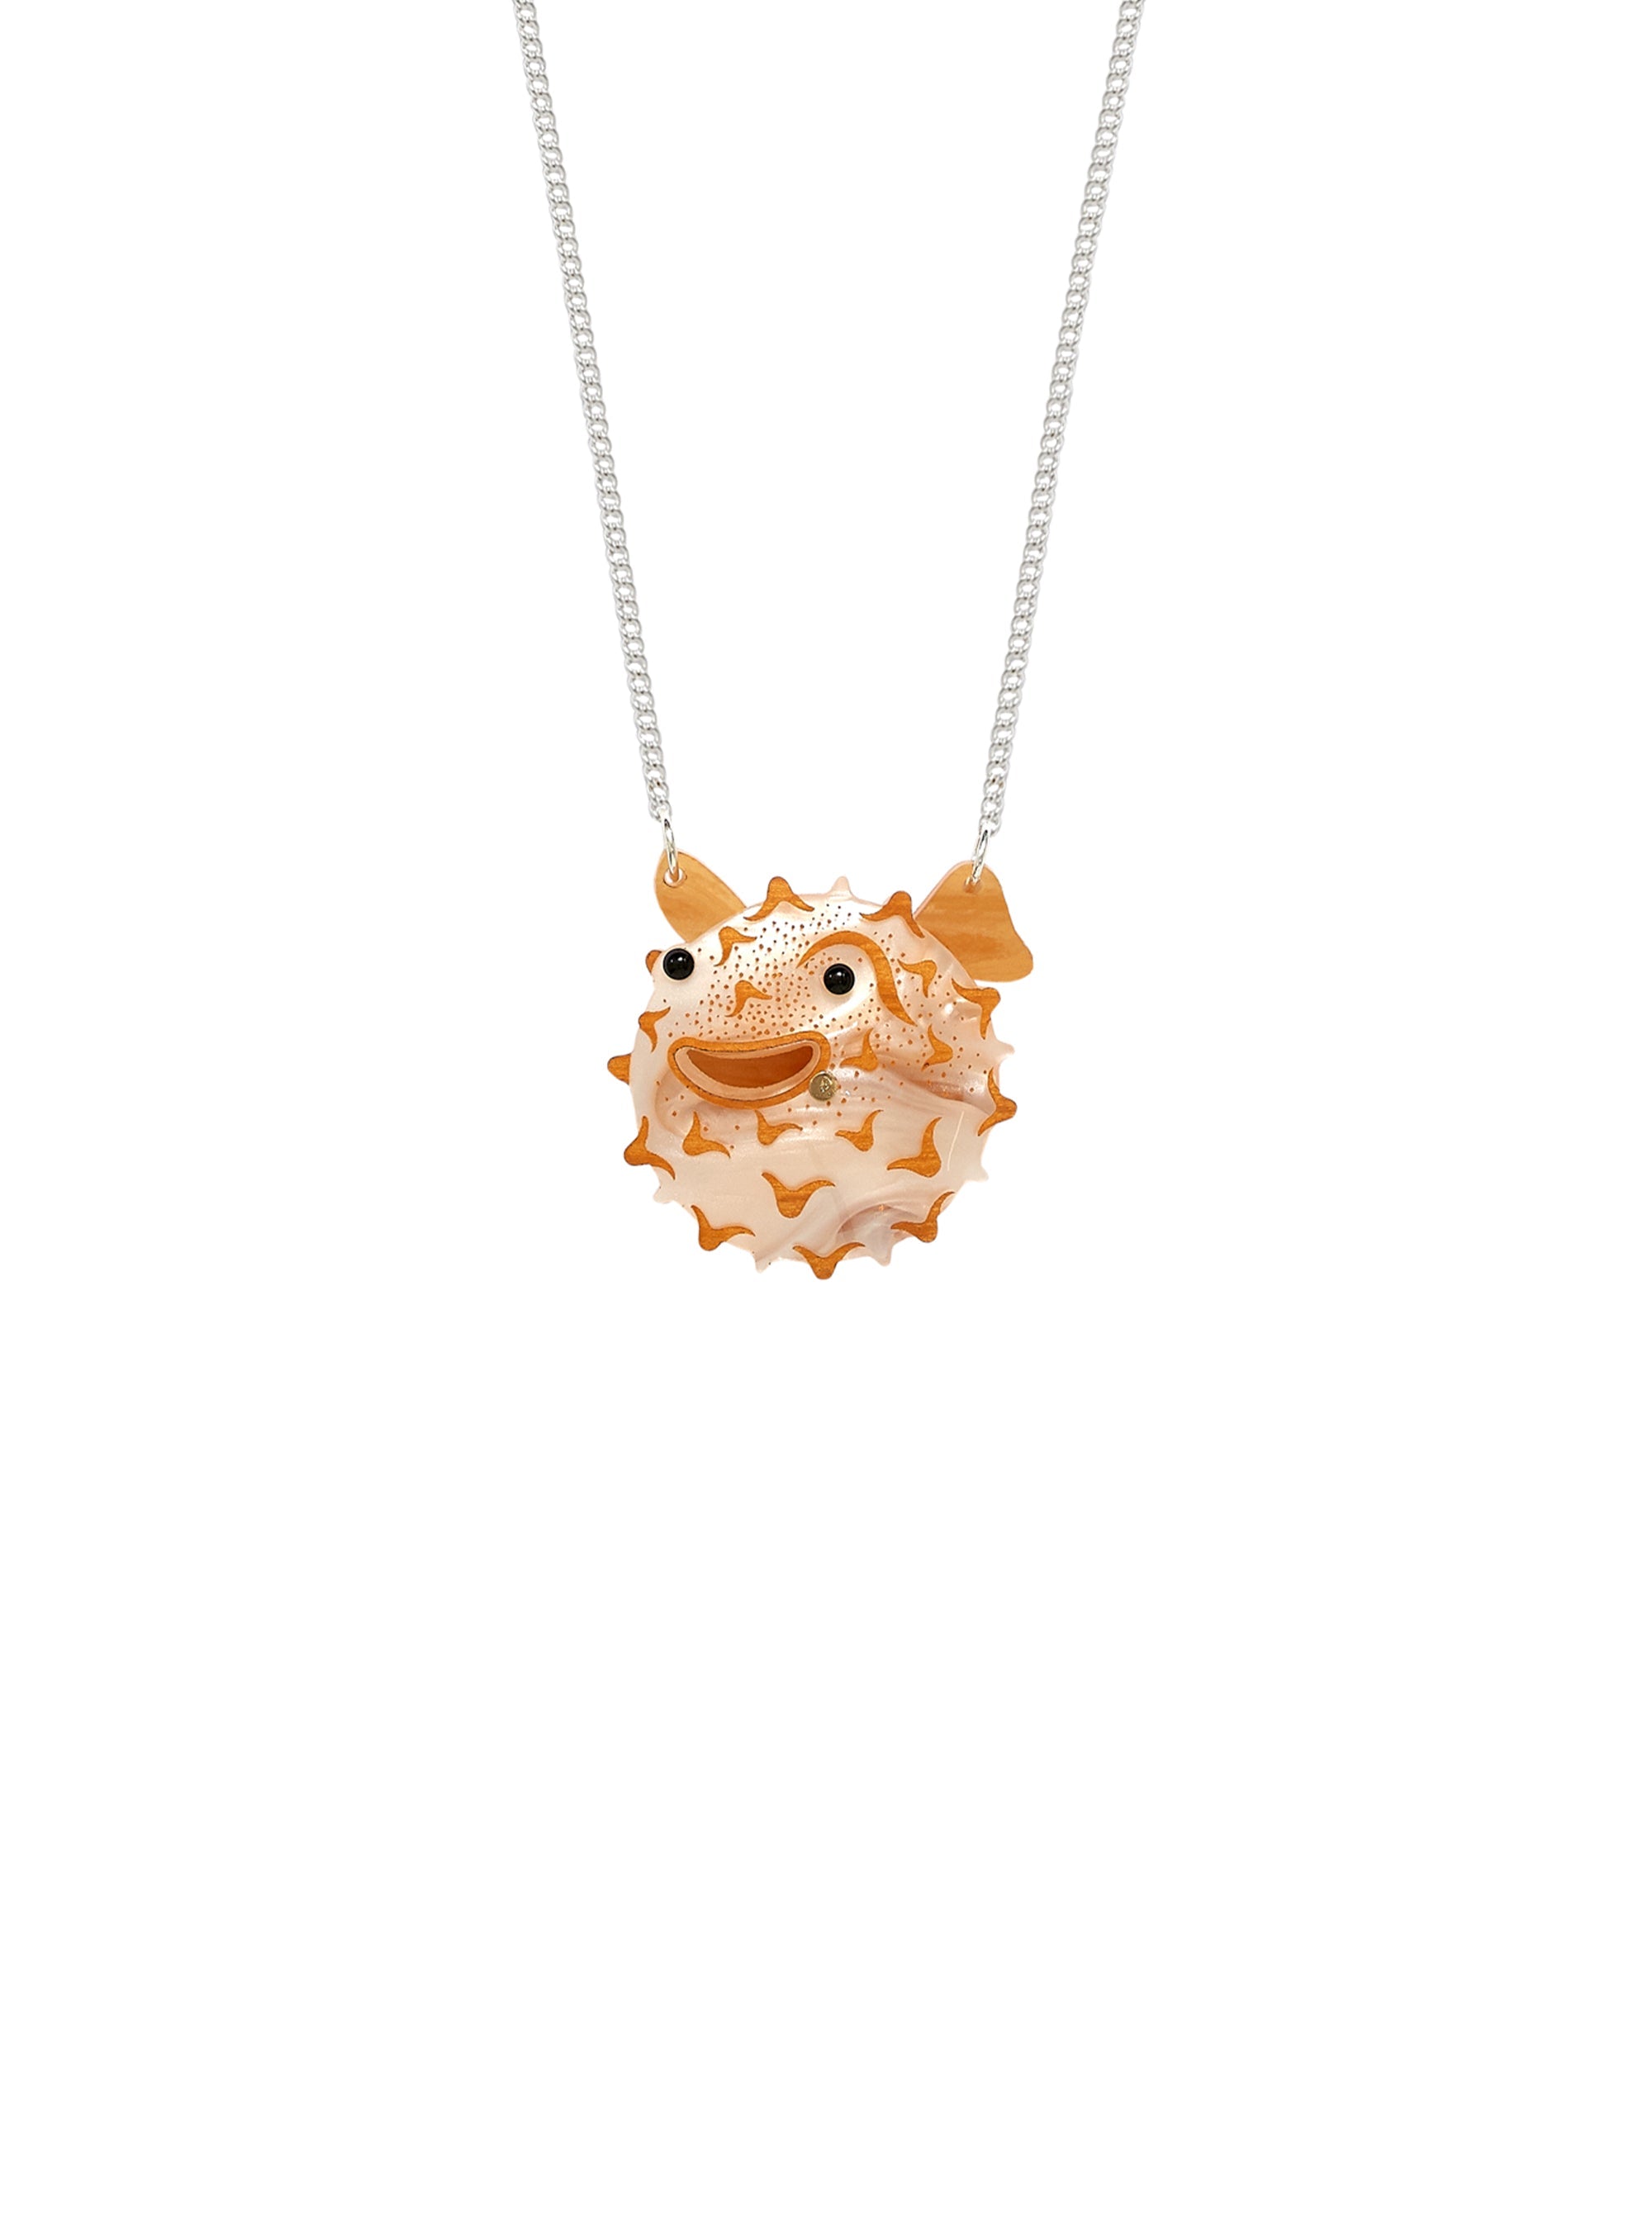 Puffer Fish Necklace